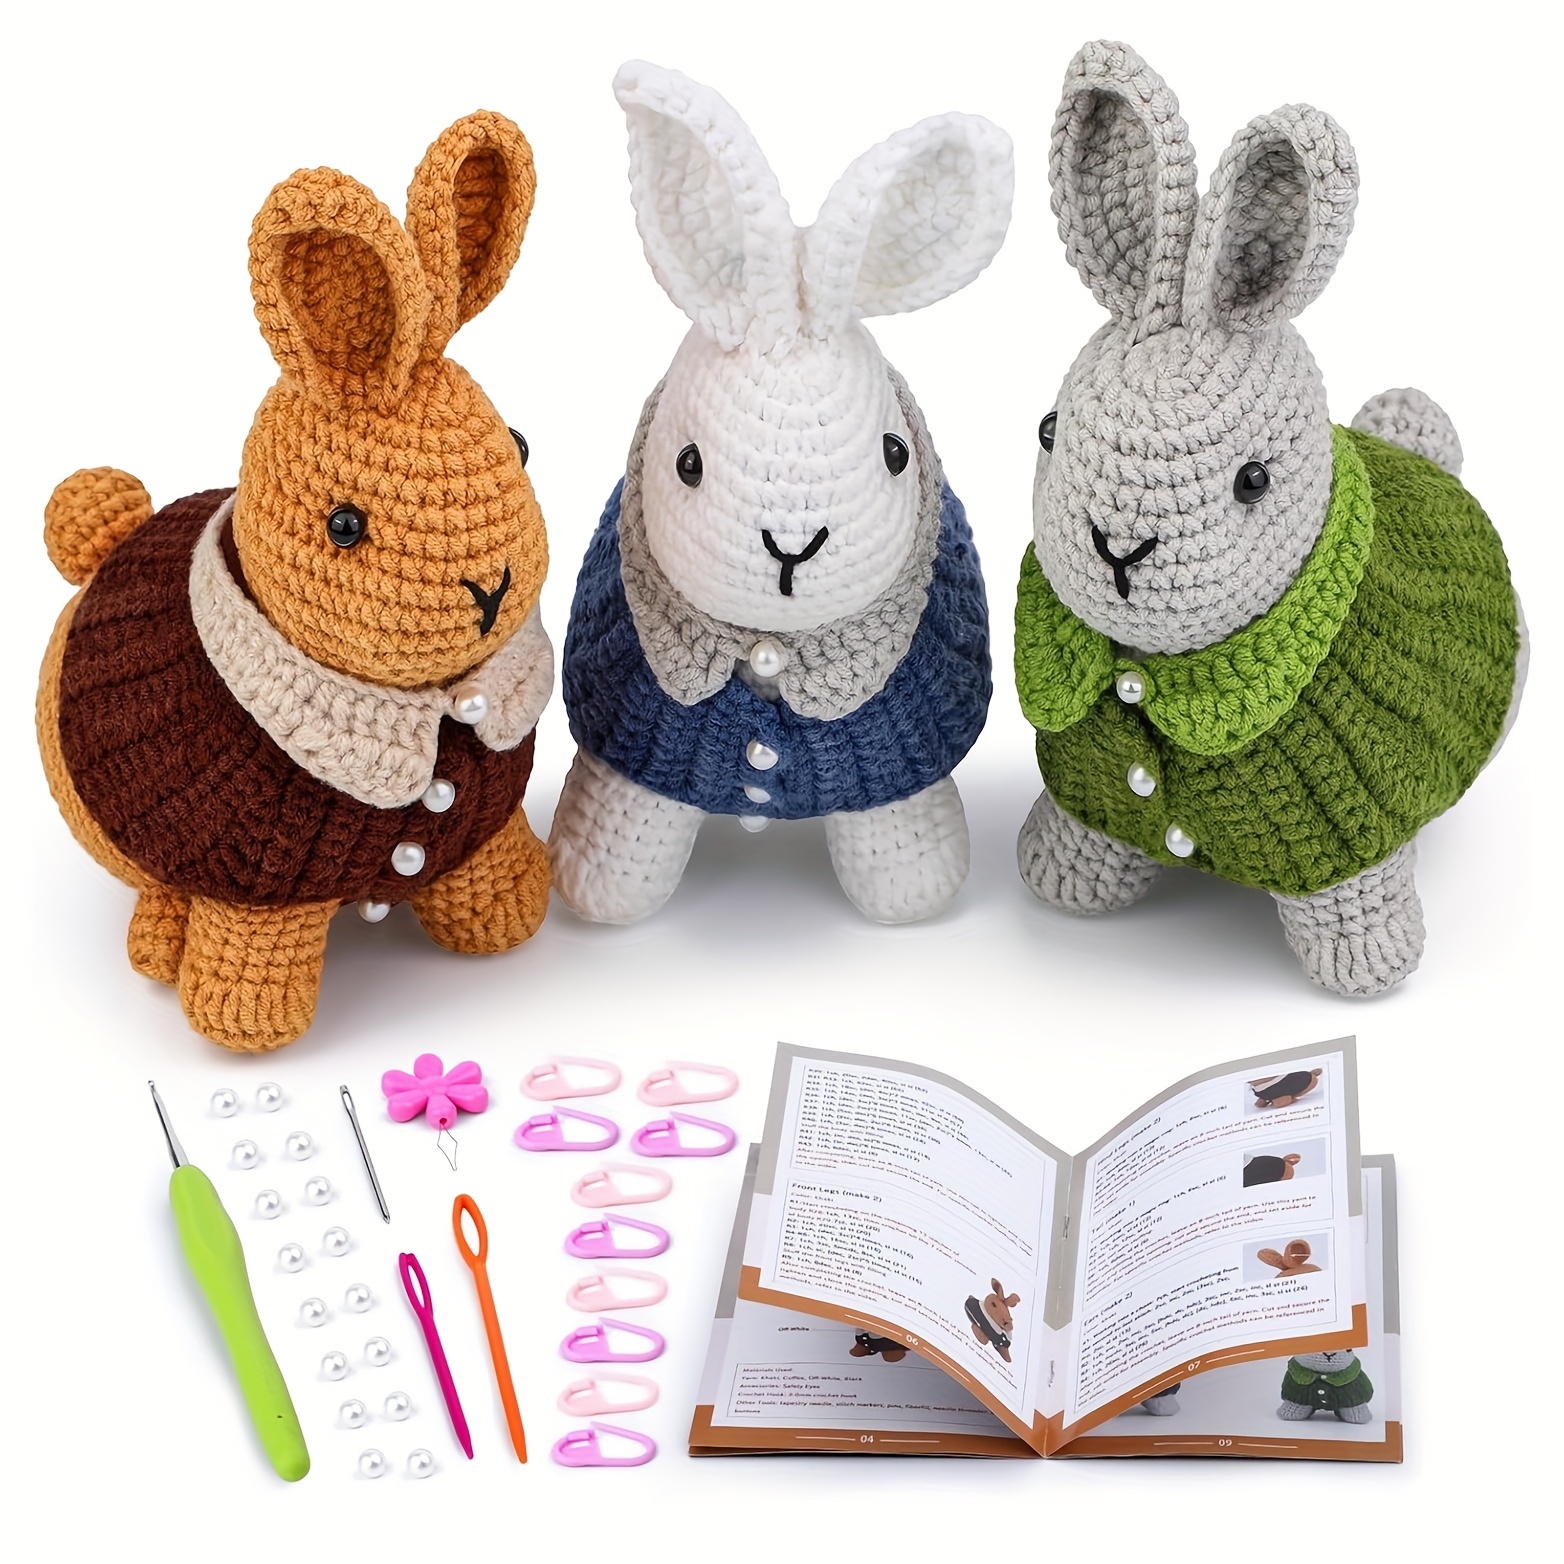 

3pcs Crochet Kit For Beginners, Rabbit Crocheting Animals Kits With Step-by-step Video Tutorials, Knitting Supplies For Adults, Crochet Hooks Yarn Diy Craft Art